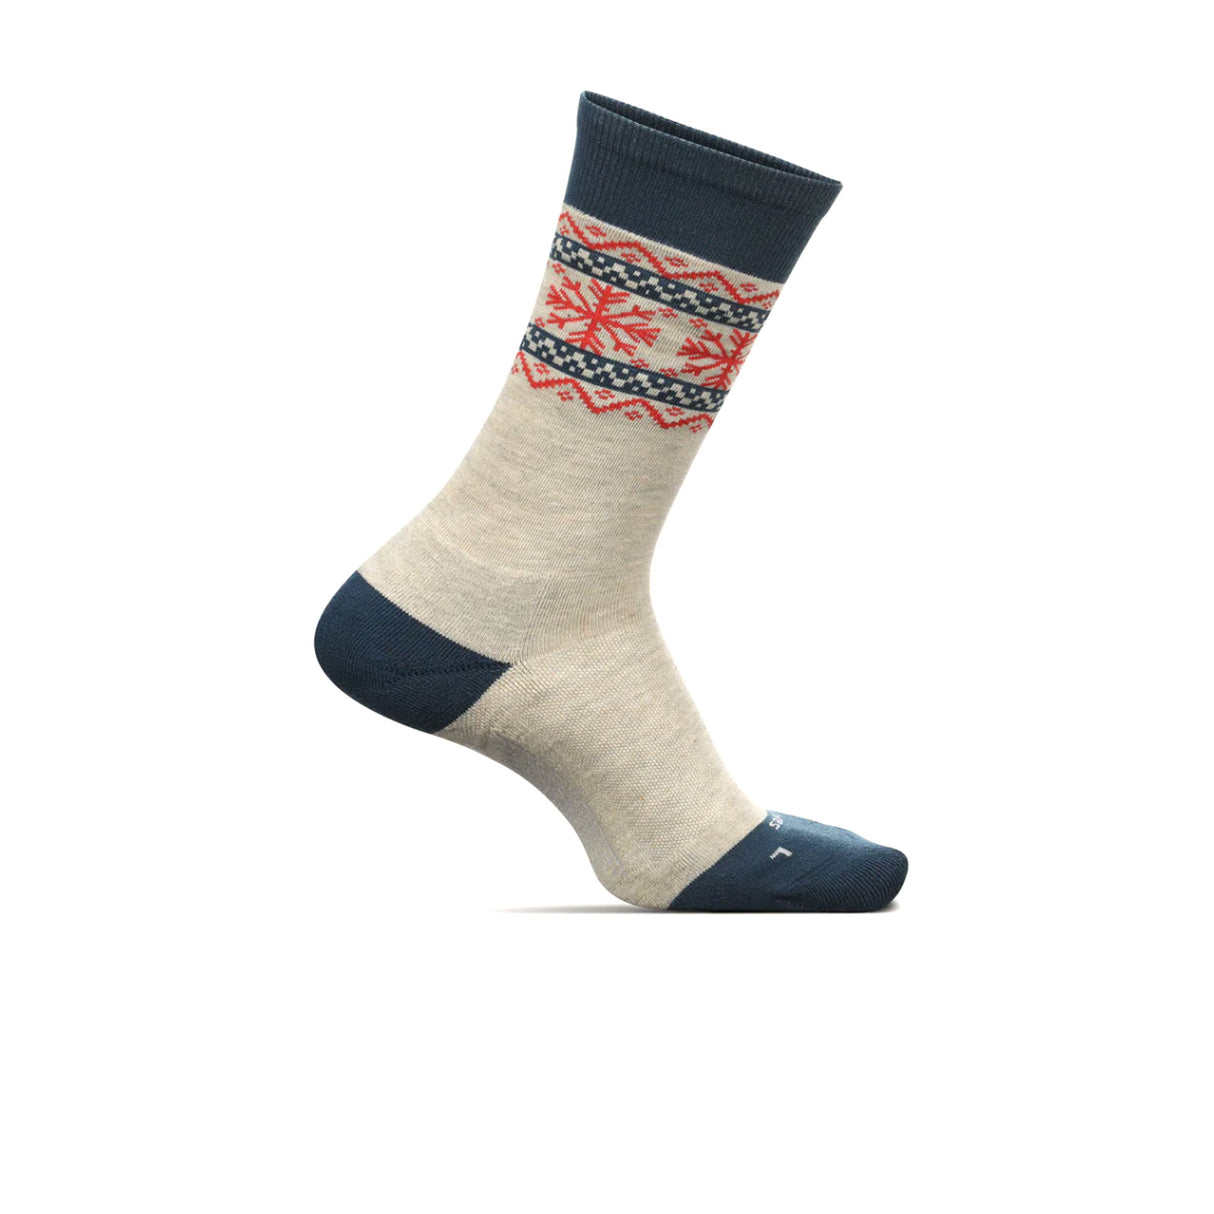 Feetures Everyday Snowflake Cushion Crew Sock (Women) - Oatmeal Accessories - Socks - Lifestyle - The Heel Shoe Fitters